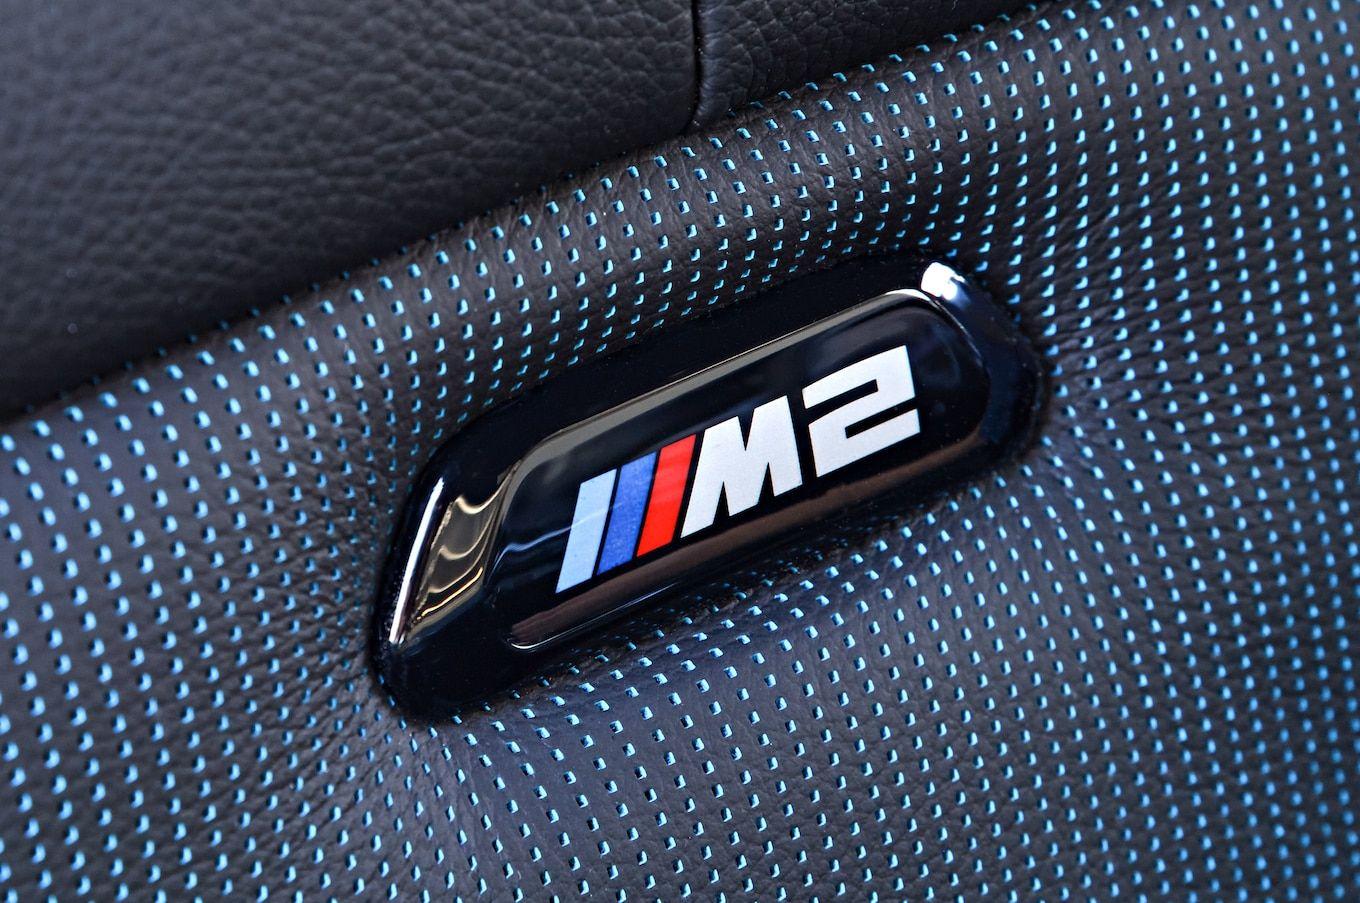 BMW M2 Logo - 2019 BMW M2 Competition logo on seat - Motortrend